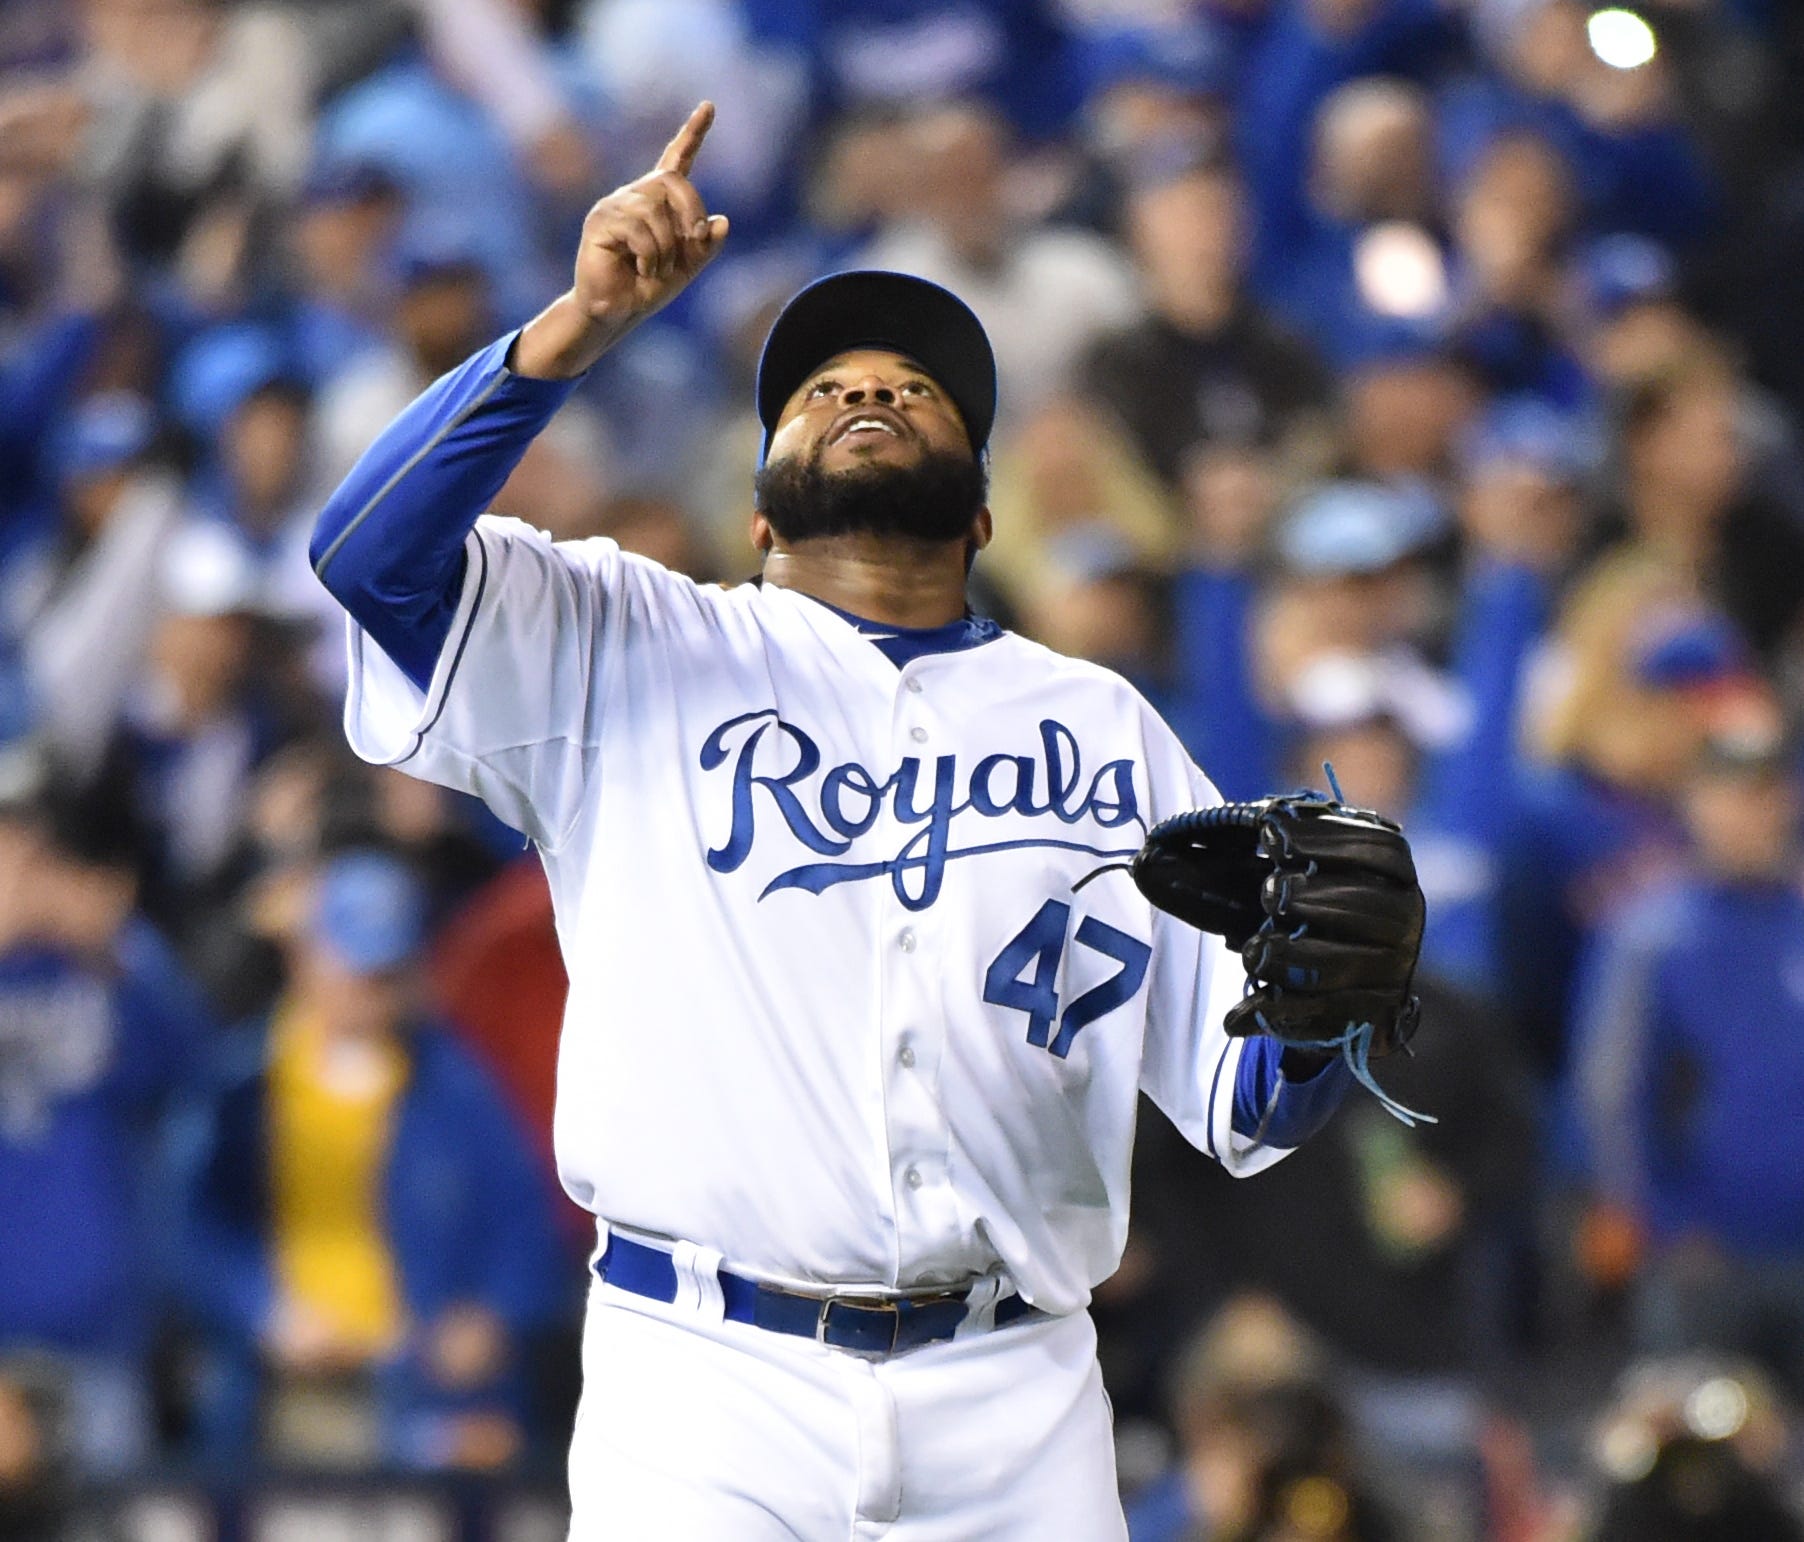 Johnny Cueto pitched a complete game in Game 2 of the World Series, tilting the result in the Royals' favor.